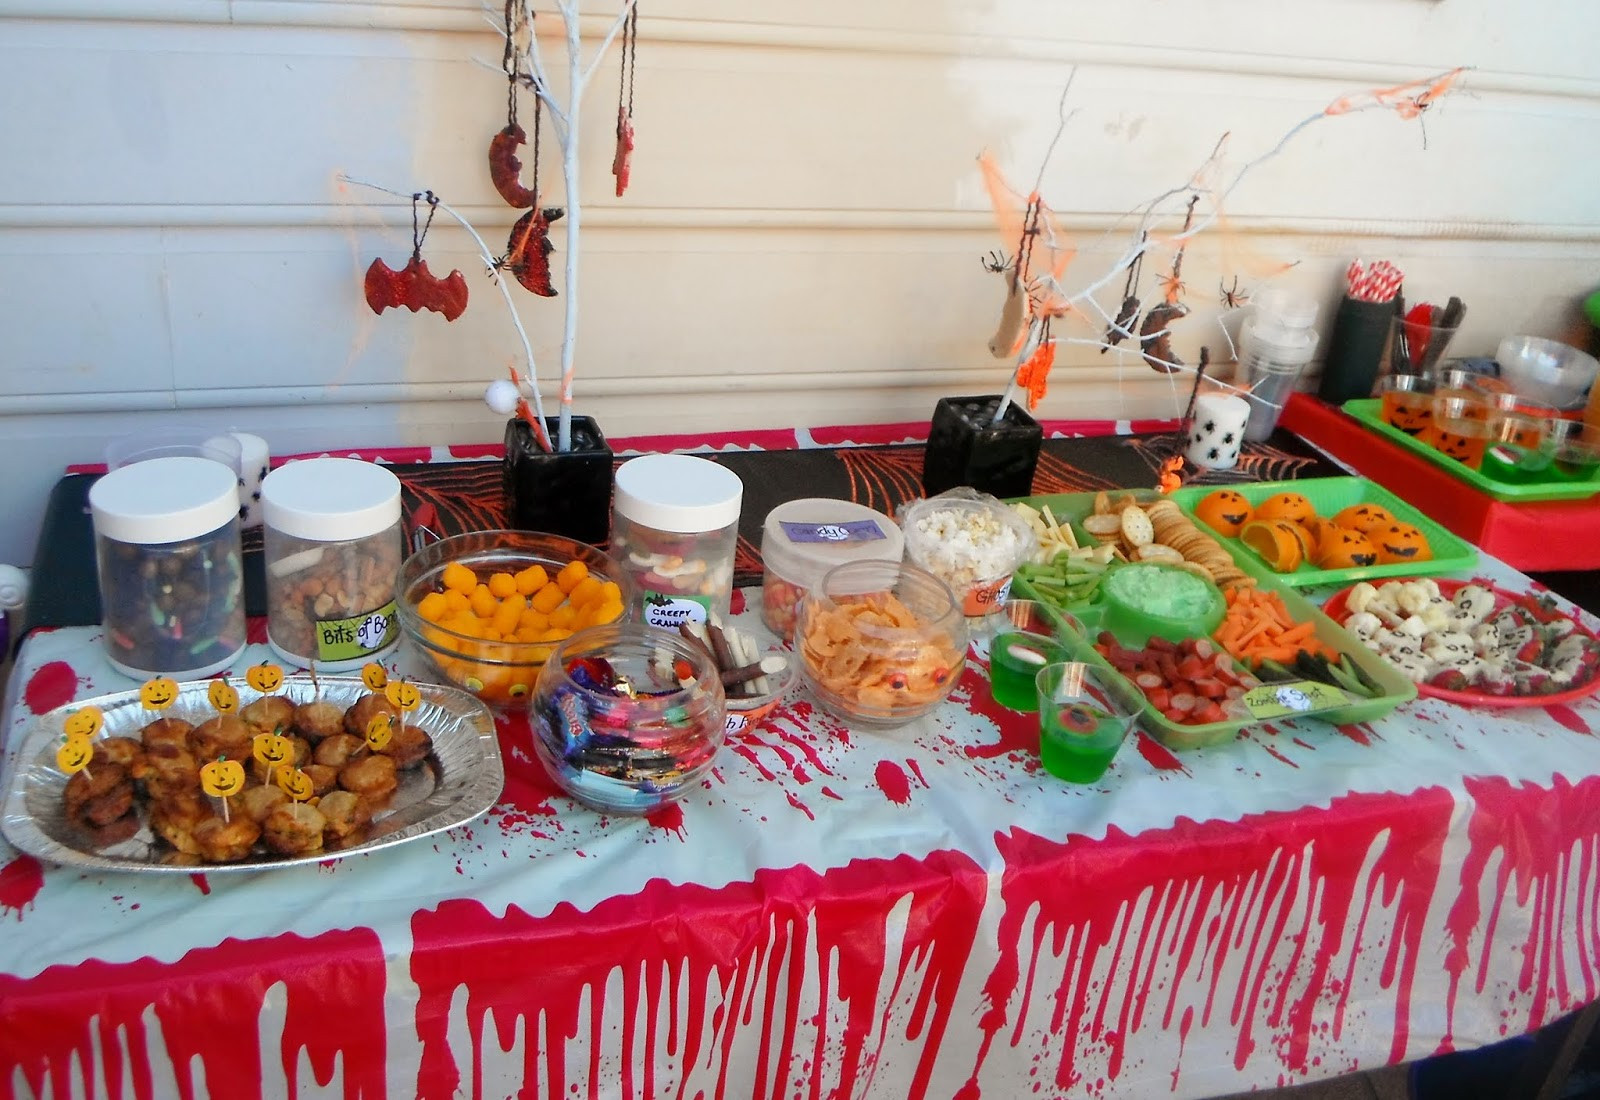 Kids Party Ideas For Halloween
 Adventures at home with Mum Halloween Party Food